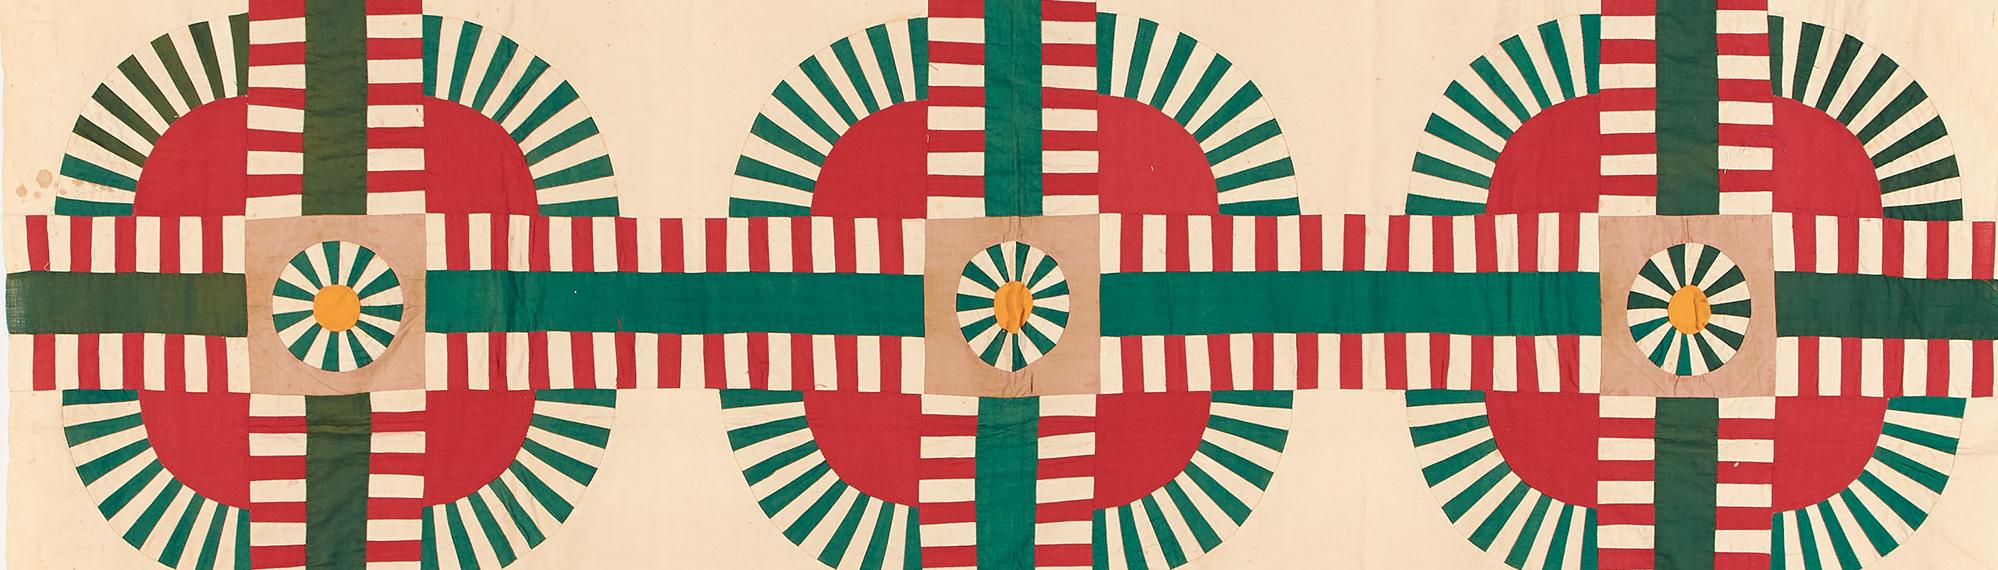 Cream colored quilt with 3-up motif on red circles bordered in radiating outward green dashes that are cross cute with solid green lines trimmed in red dashes.